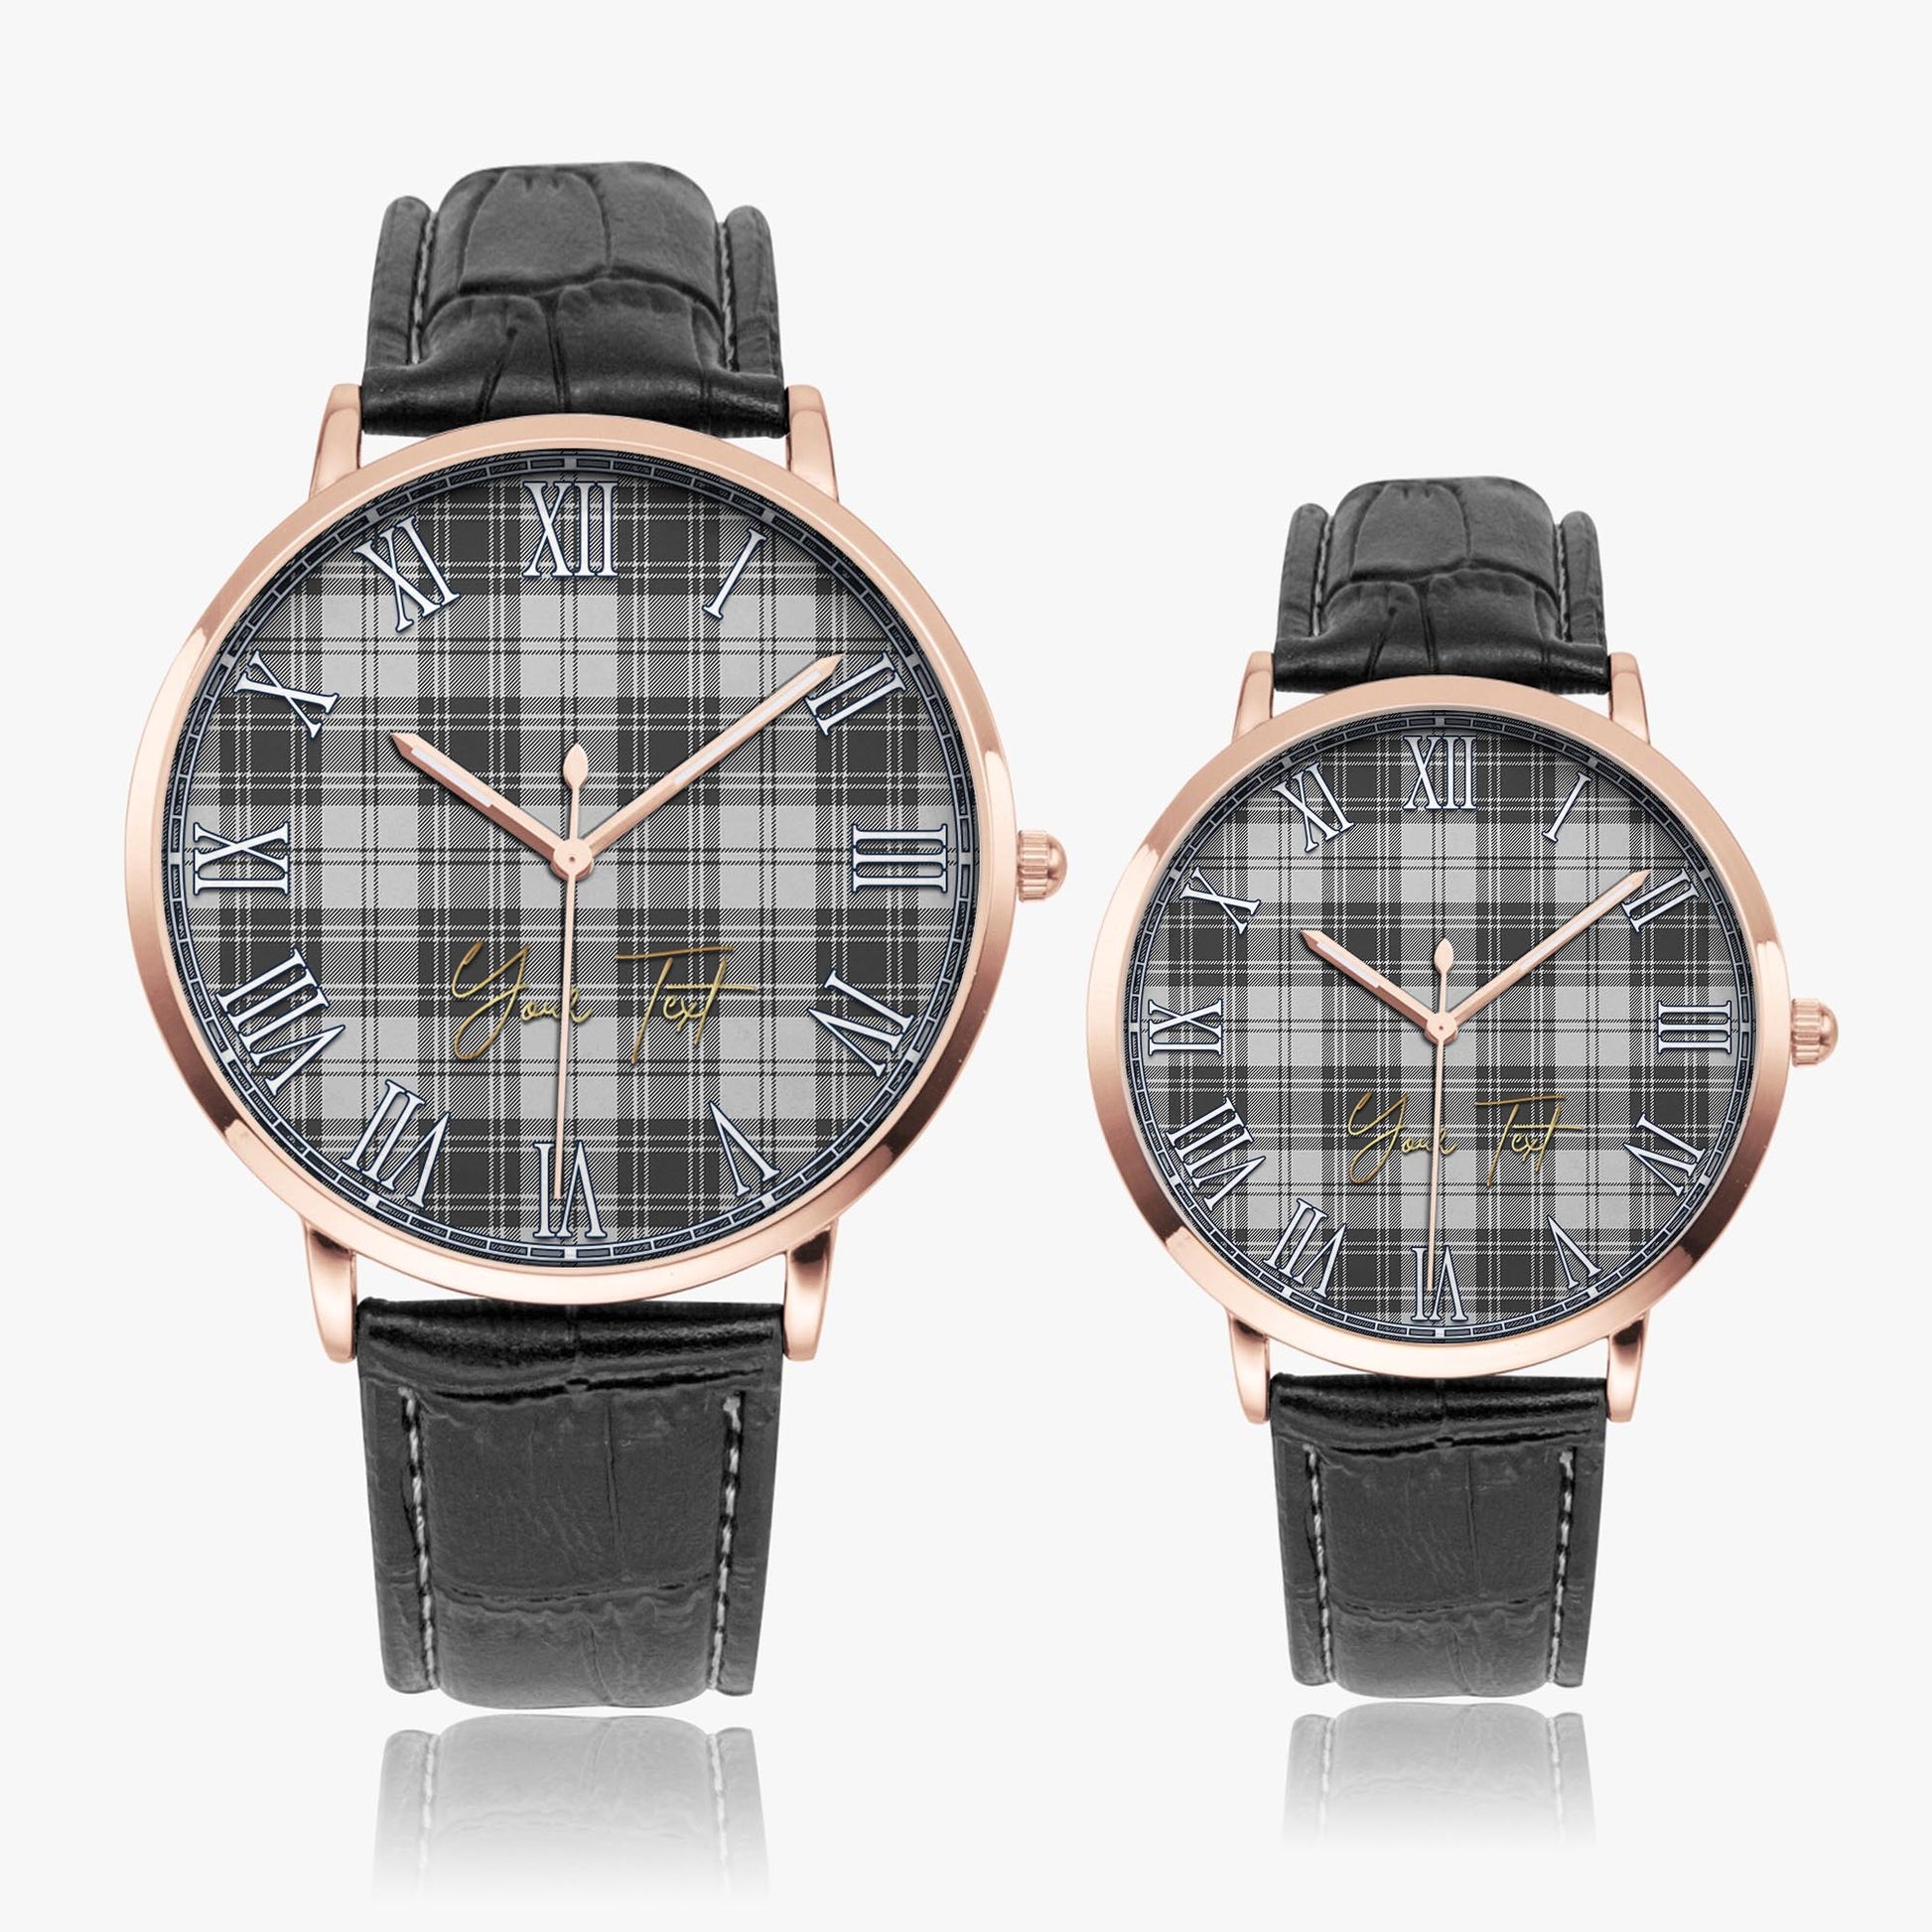 Glen Tartan Personalized Your Text Leather Trap Quartz Watch Ultra Thin Rose Gold Case With Black Leather Strap - Tartanvibesclothing